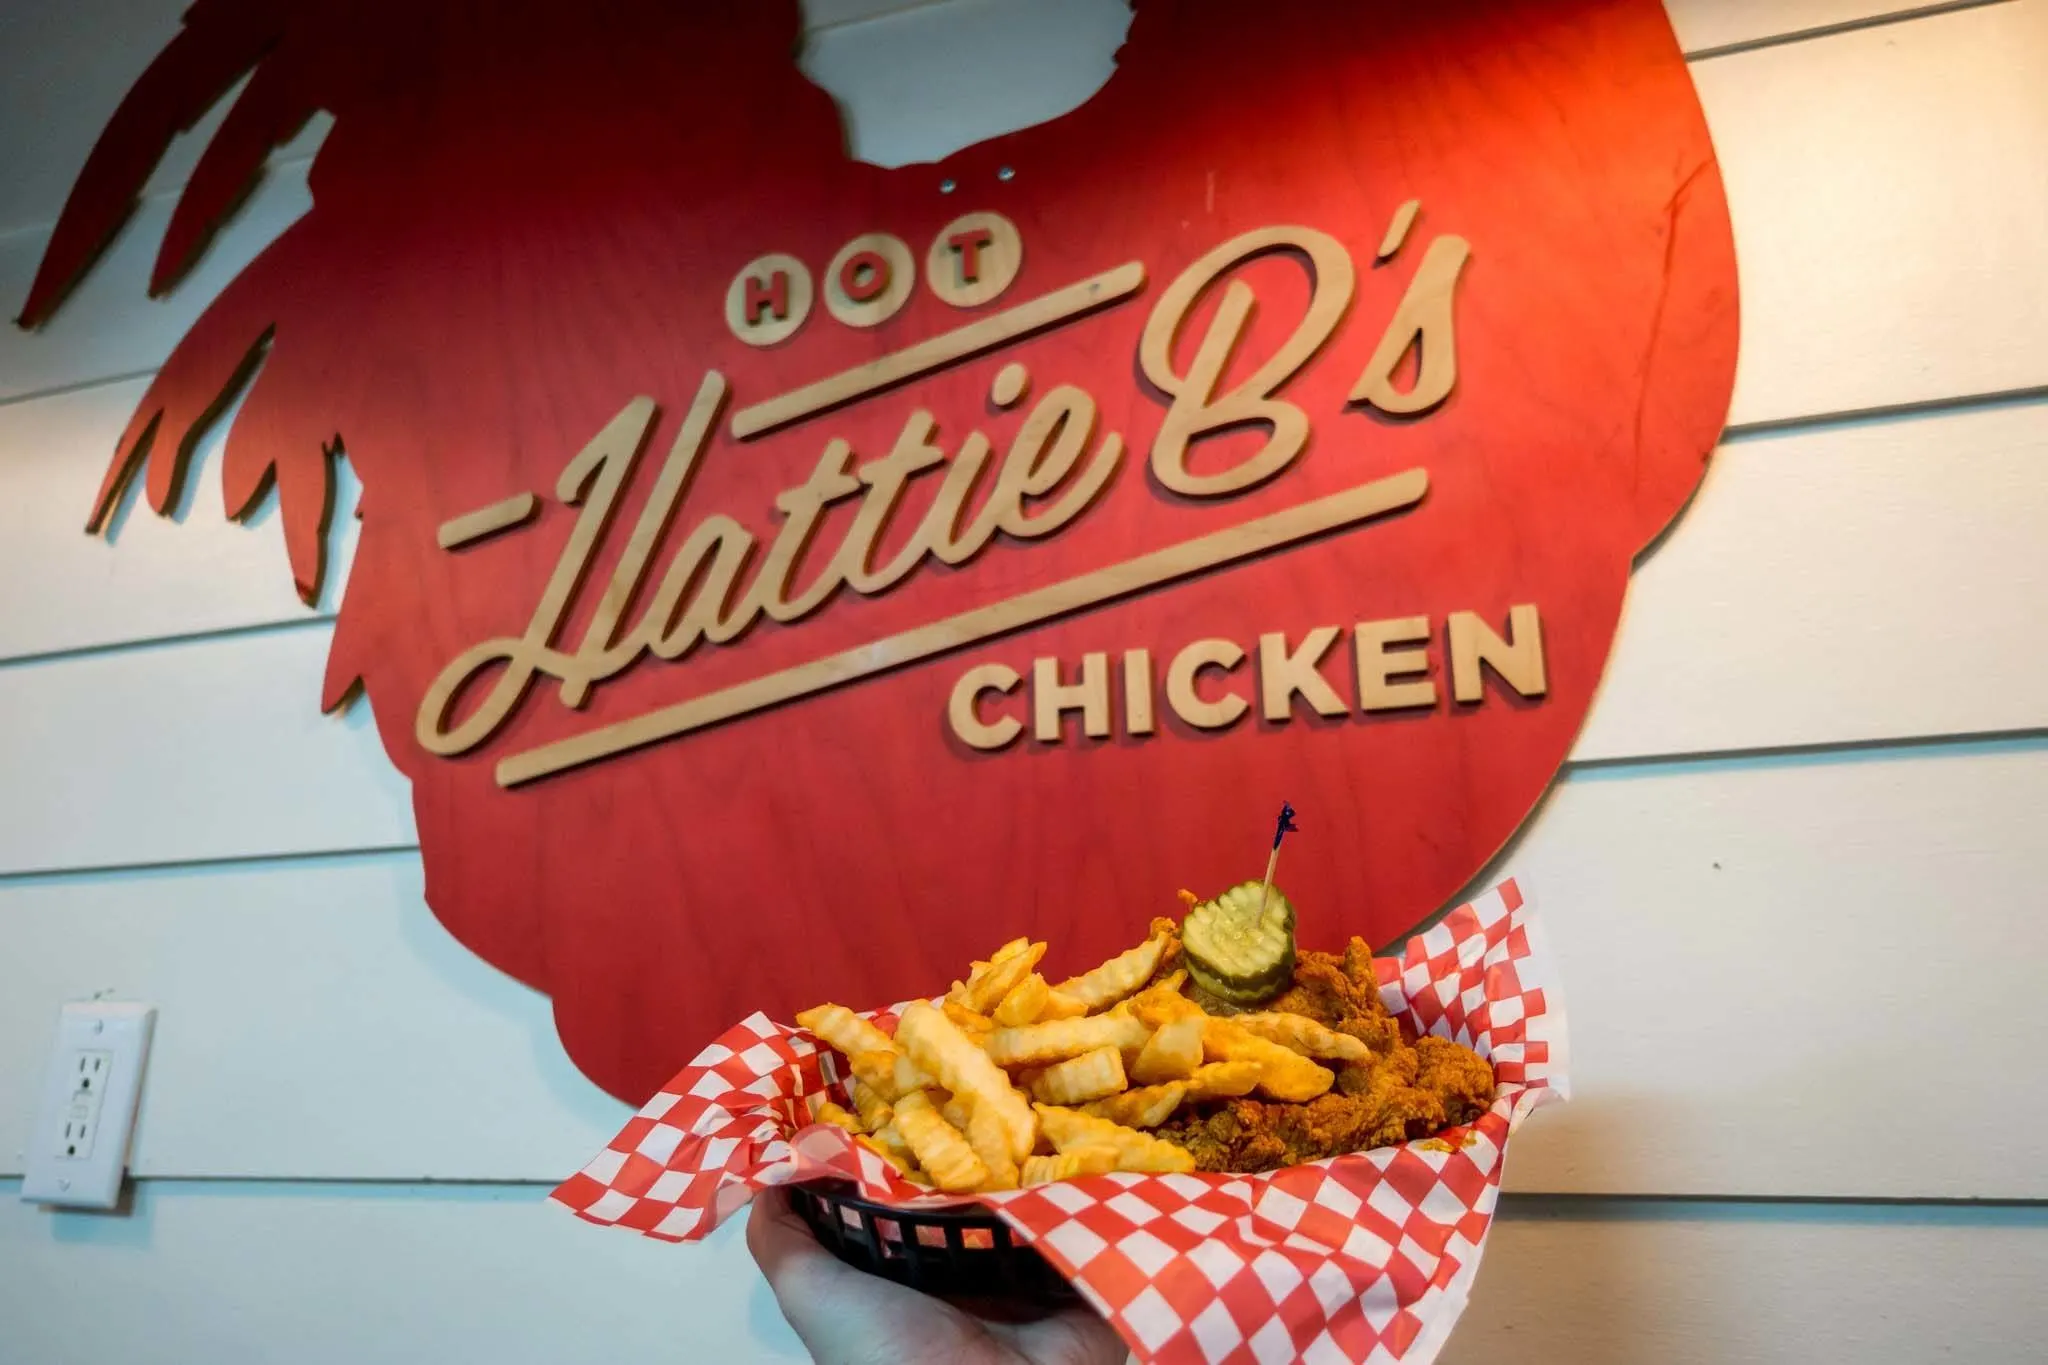 Trying hot chicken at Hattie B's is one of the most delicious things to do in Nashville, Tennessee